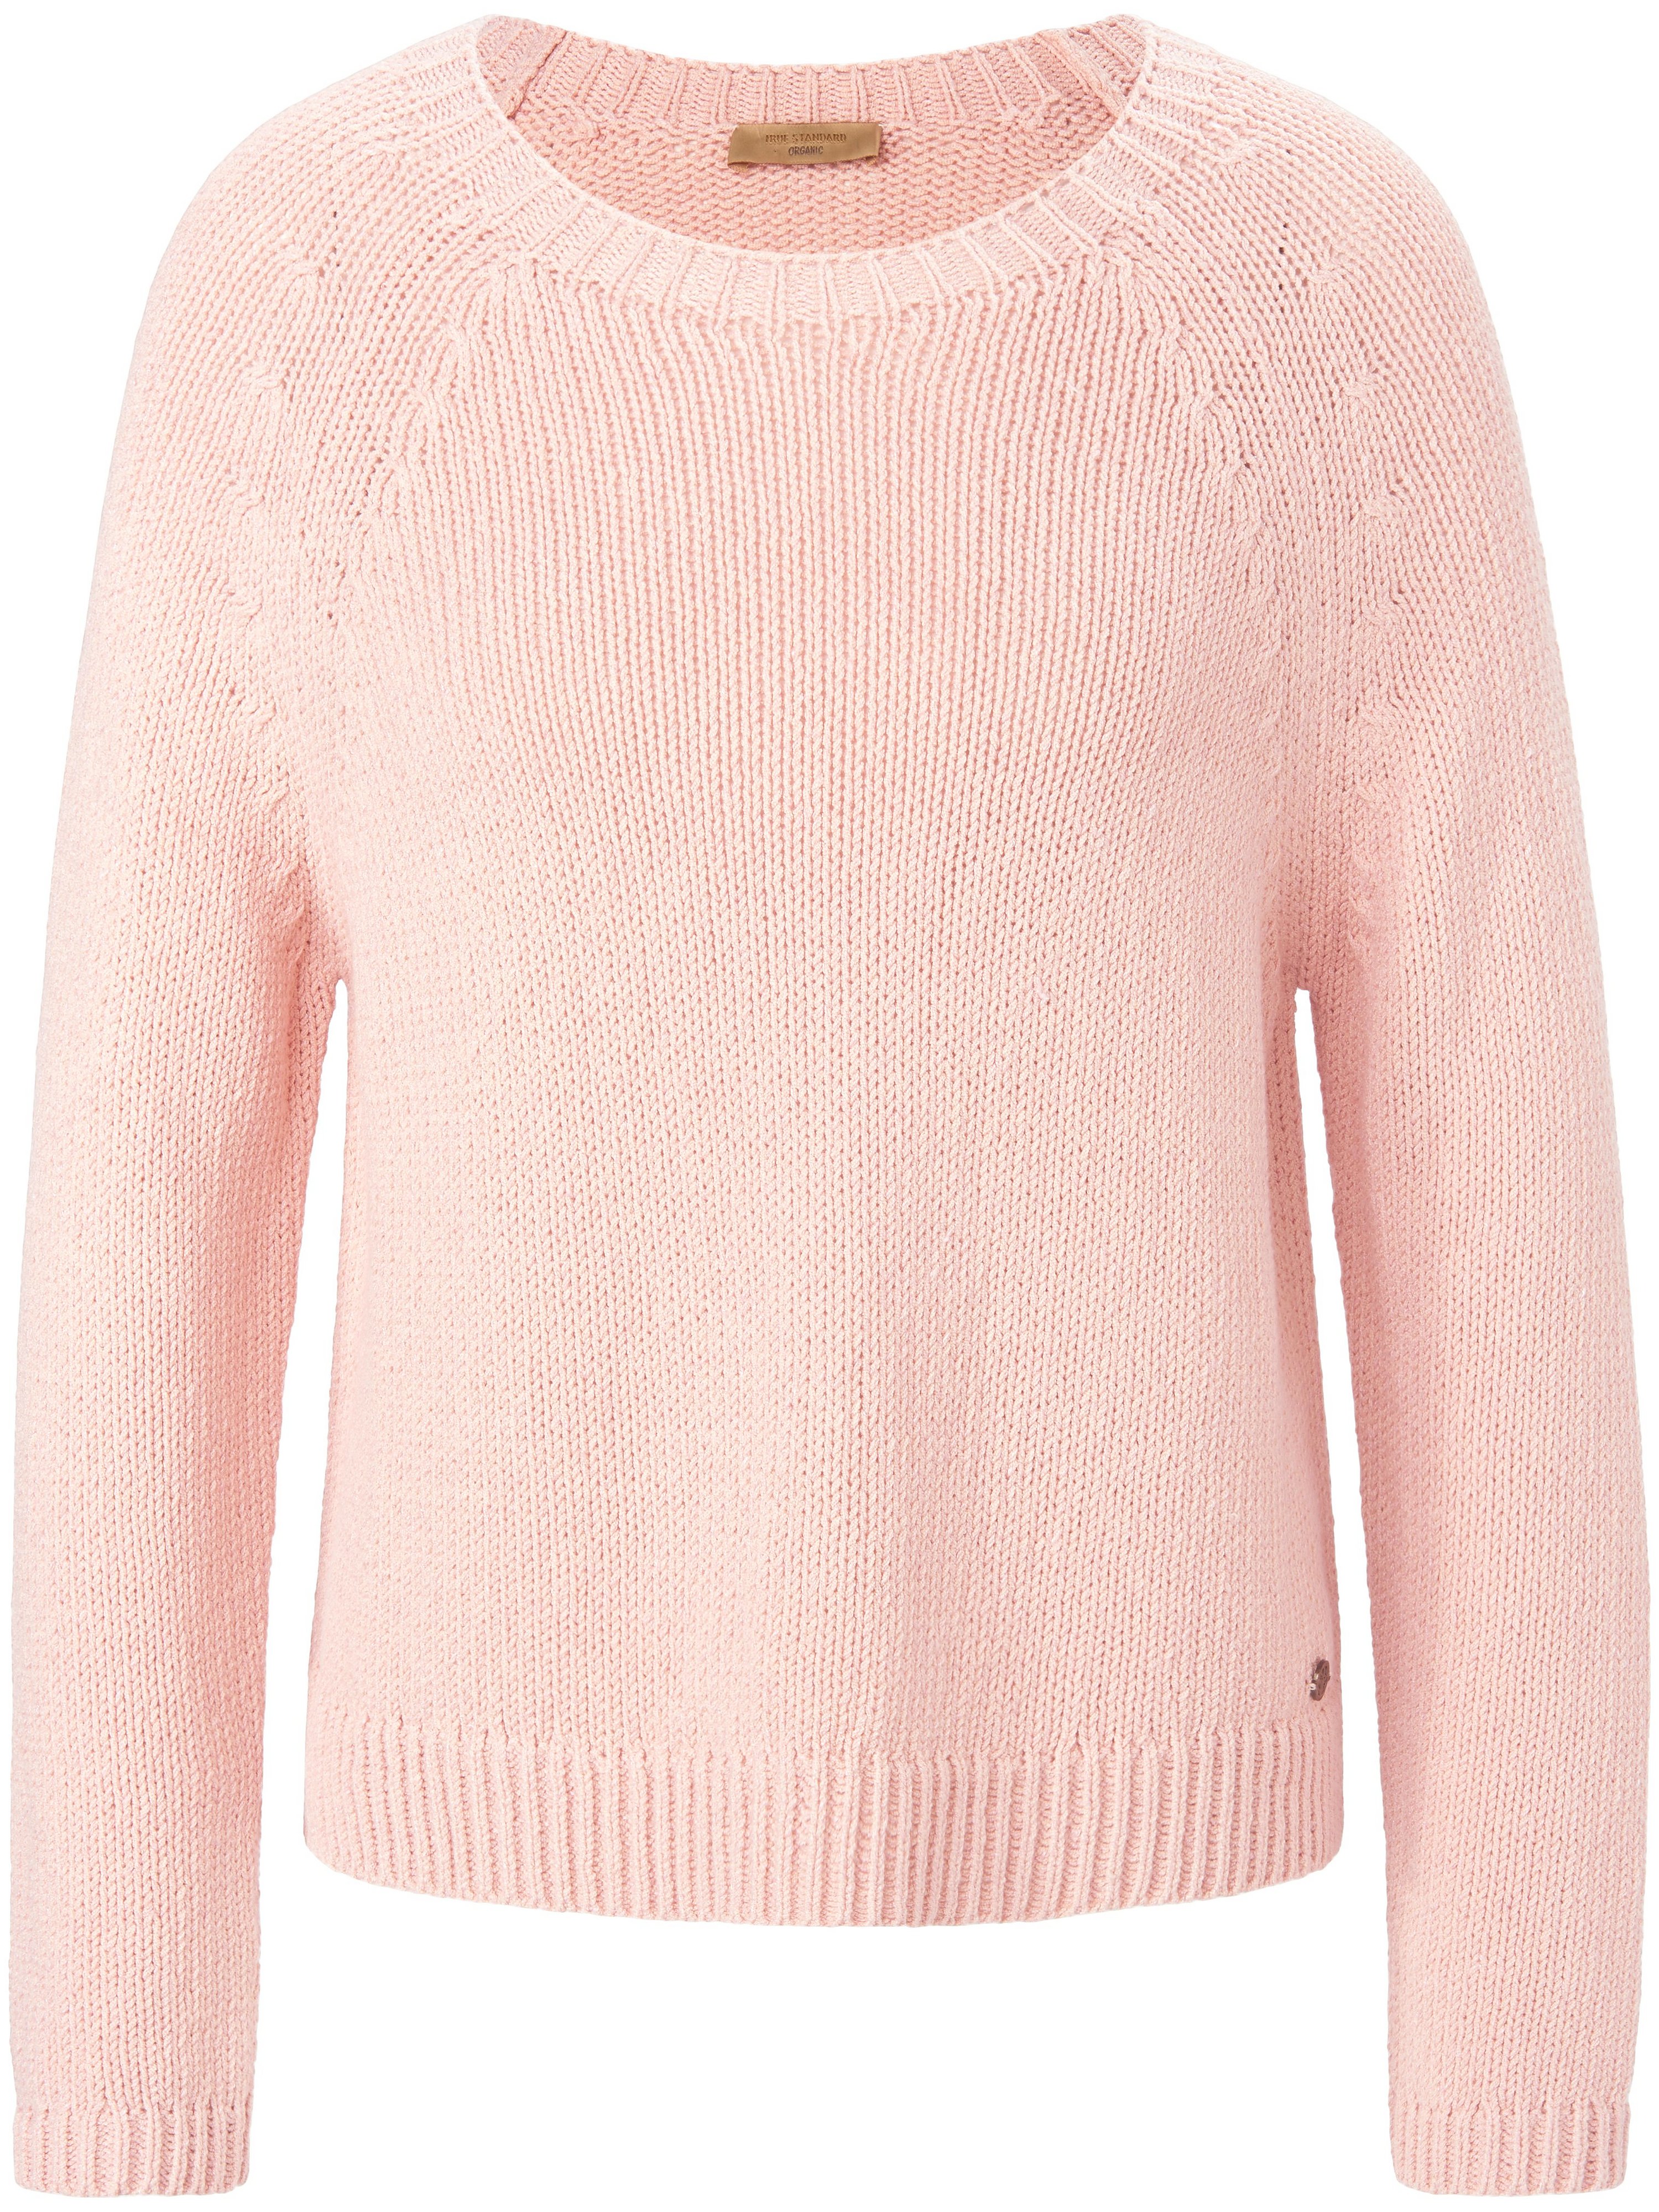 Le pull encolure ronde  tRUE STANDARD rose taille 38